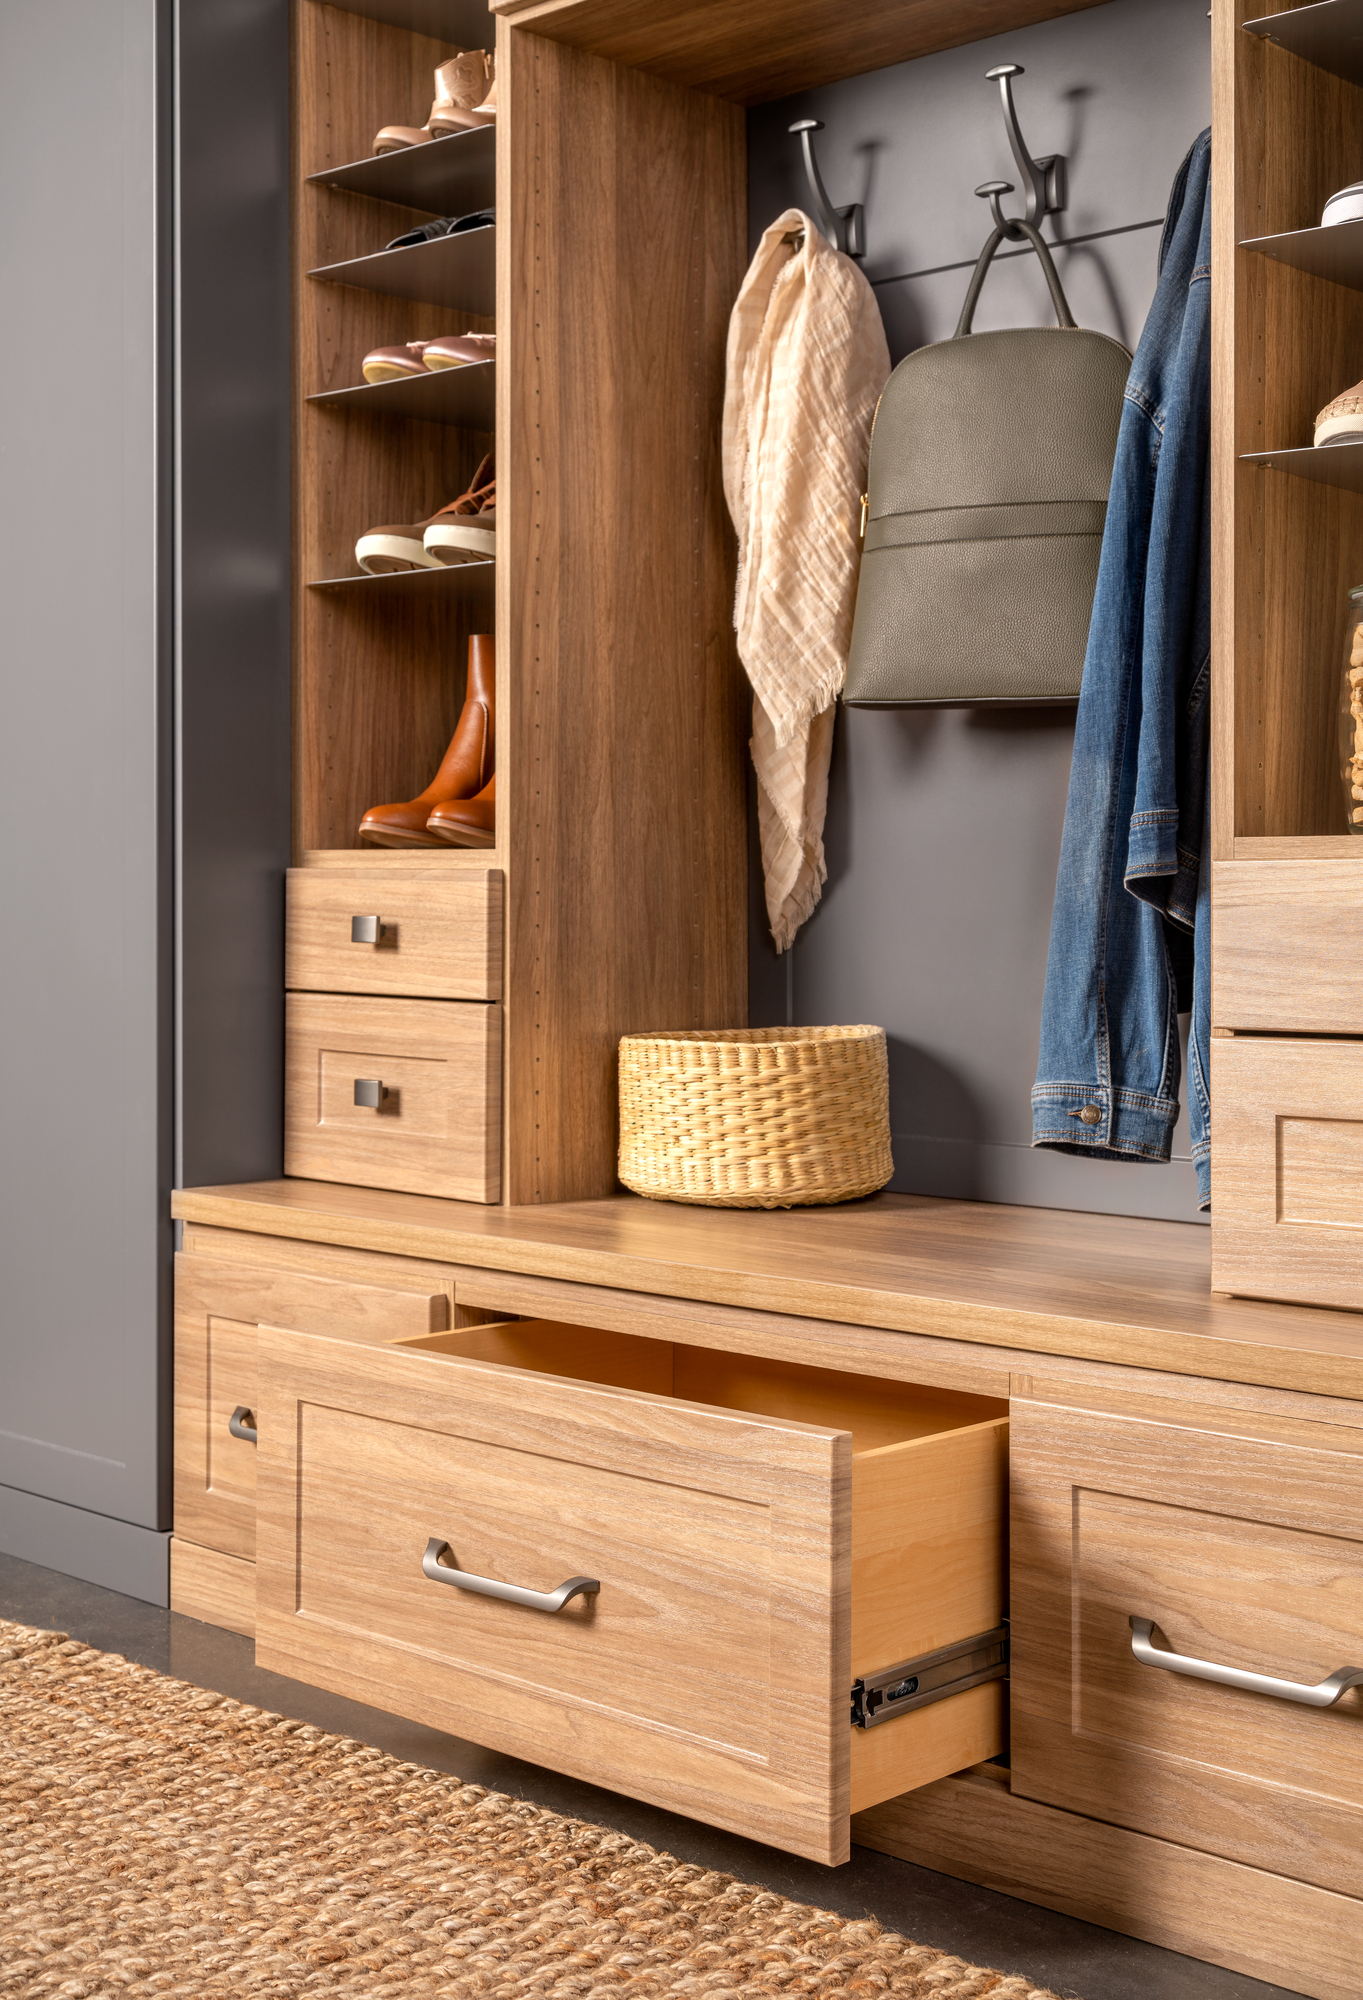 Pulled out storage drawers from an Inspired Closets entryway system